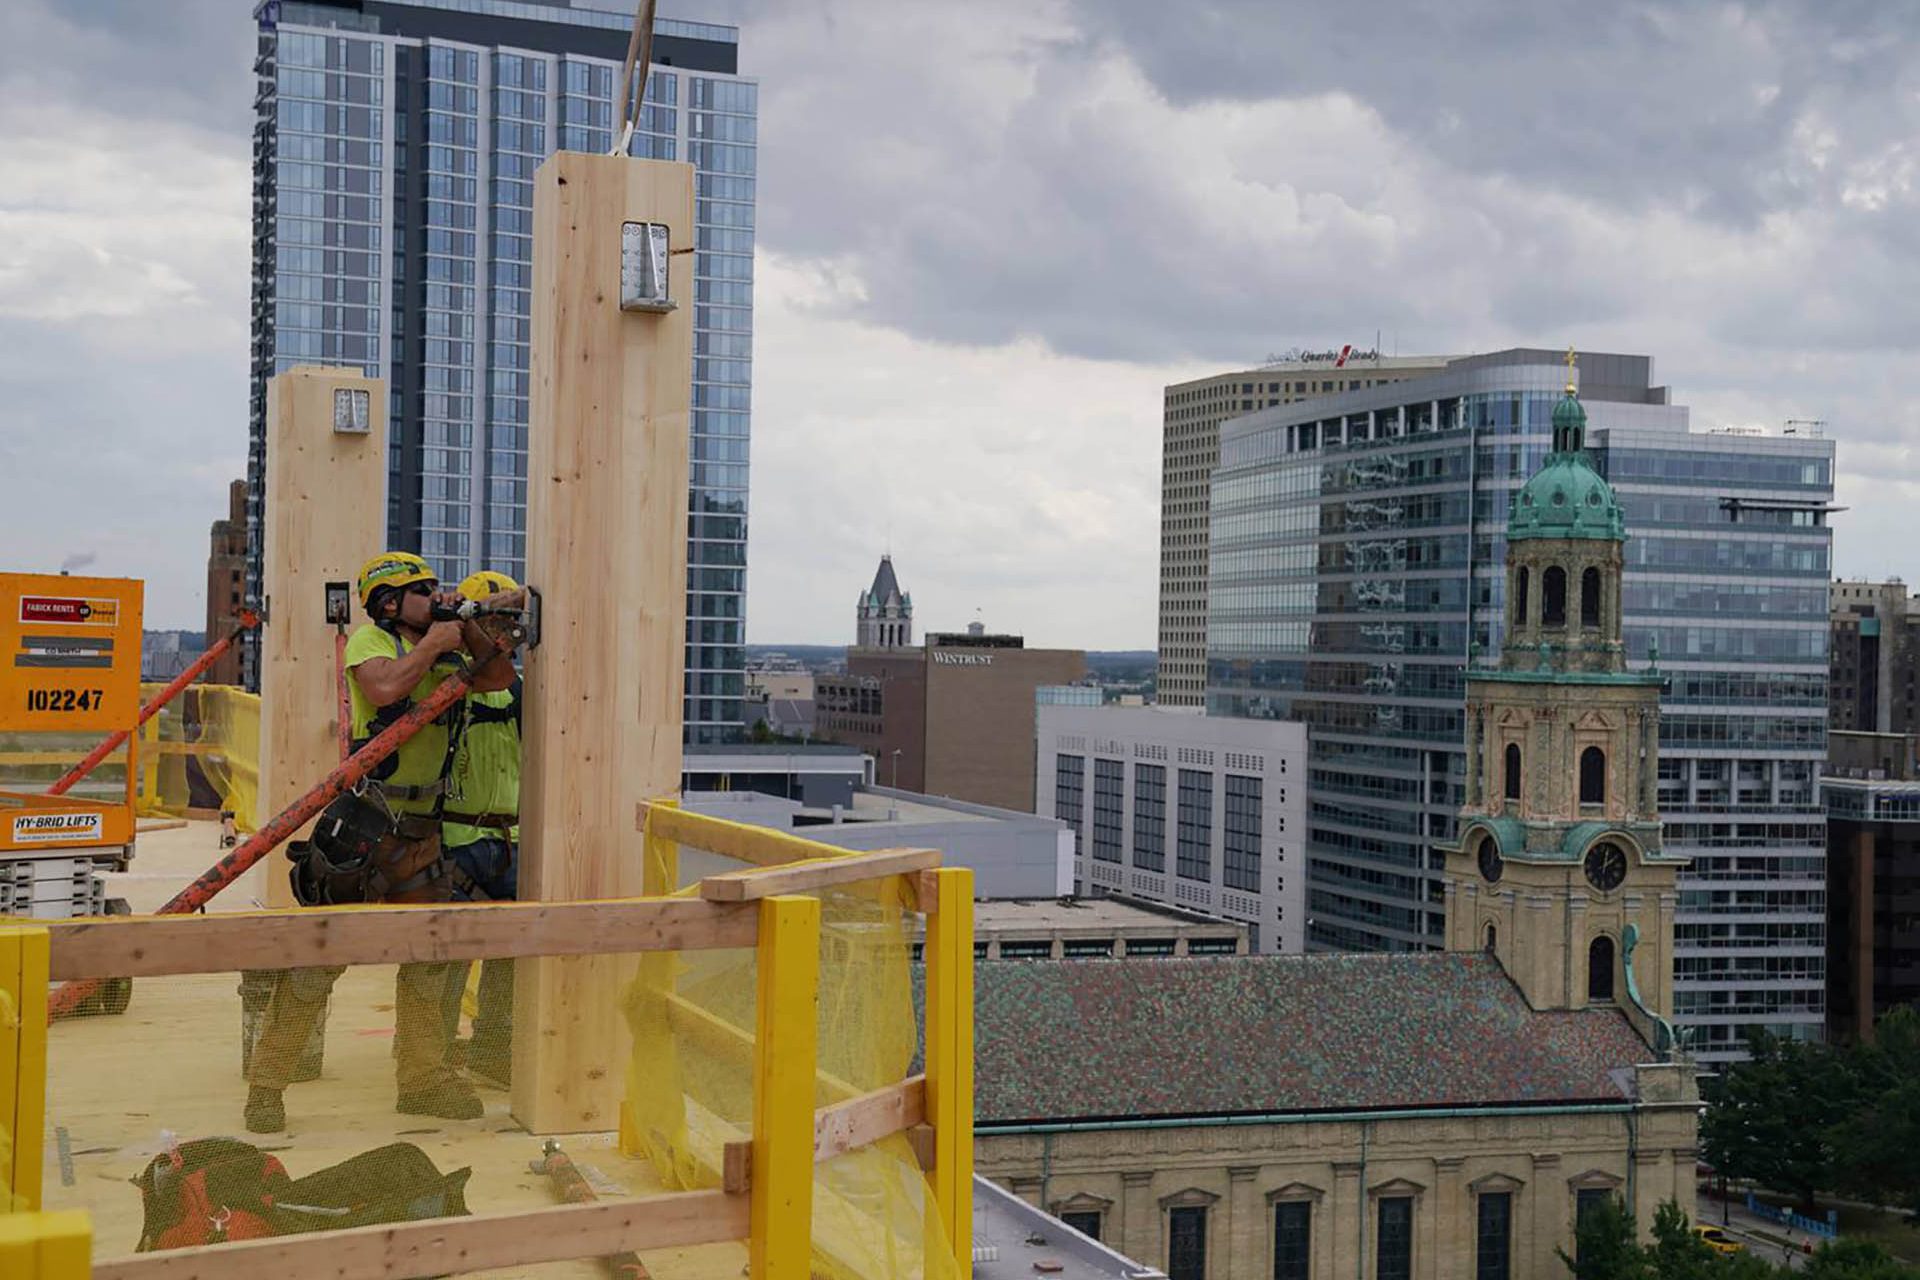 <p>In the American city of Milwaukee there is a 25-story, 86 meter or 282 foot high residential building and the structure is made entirely of solid wood. Here you can see the building during its construction in 2021.</p>